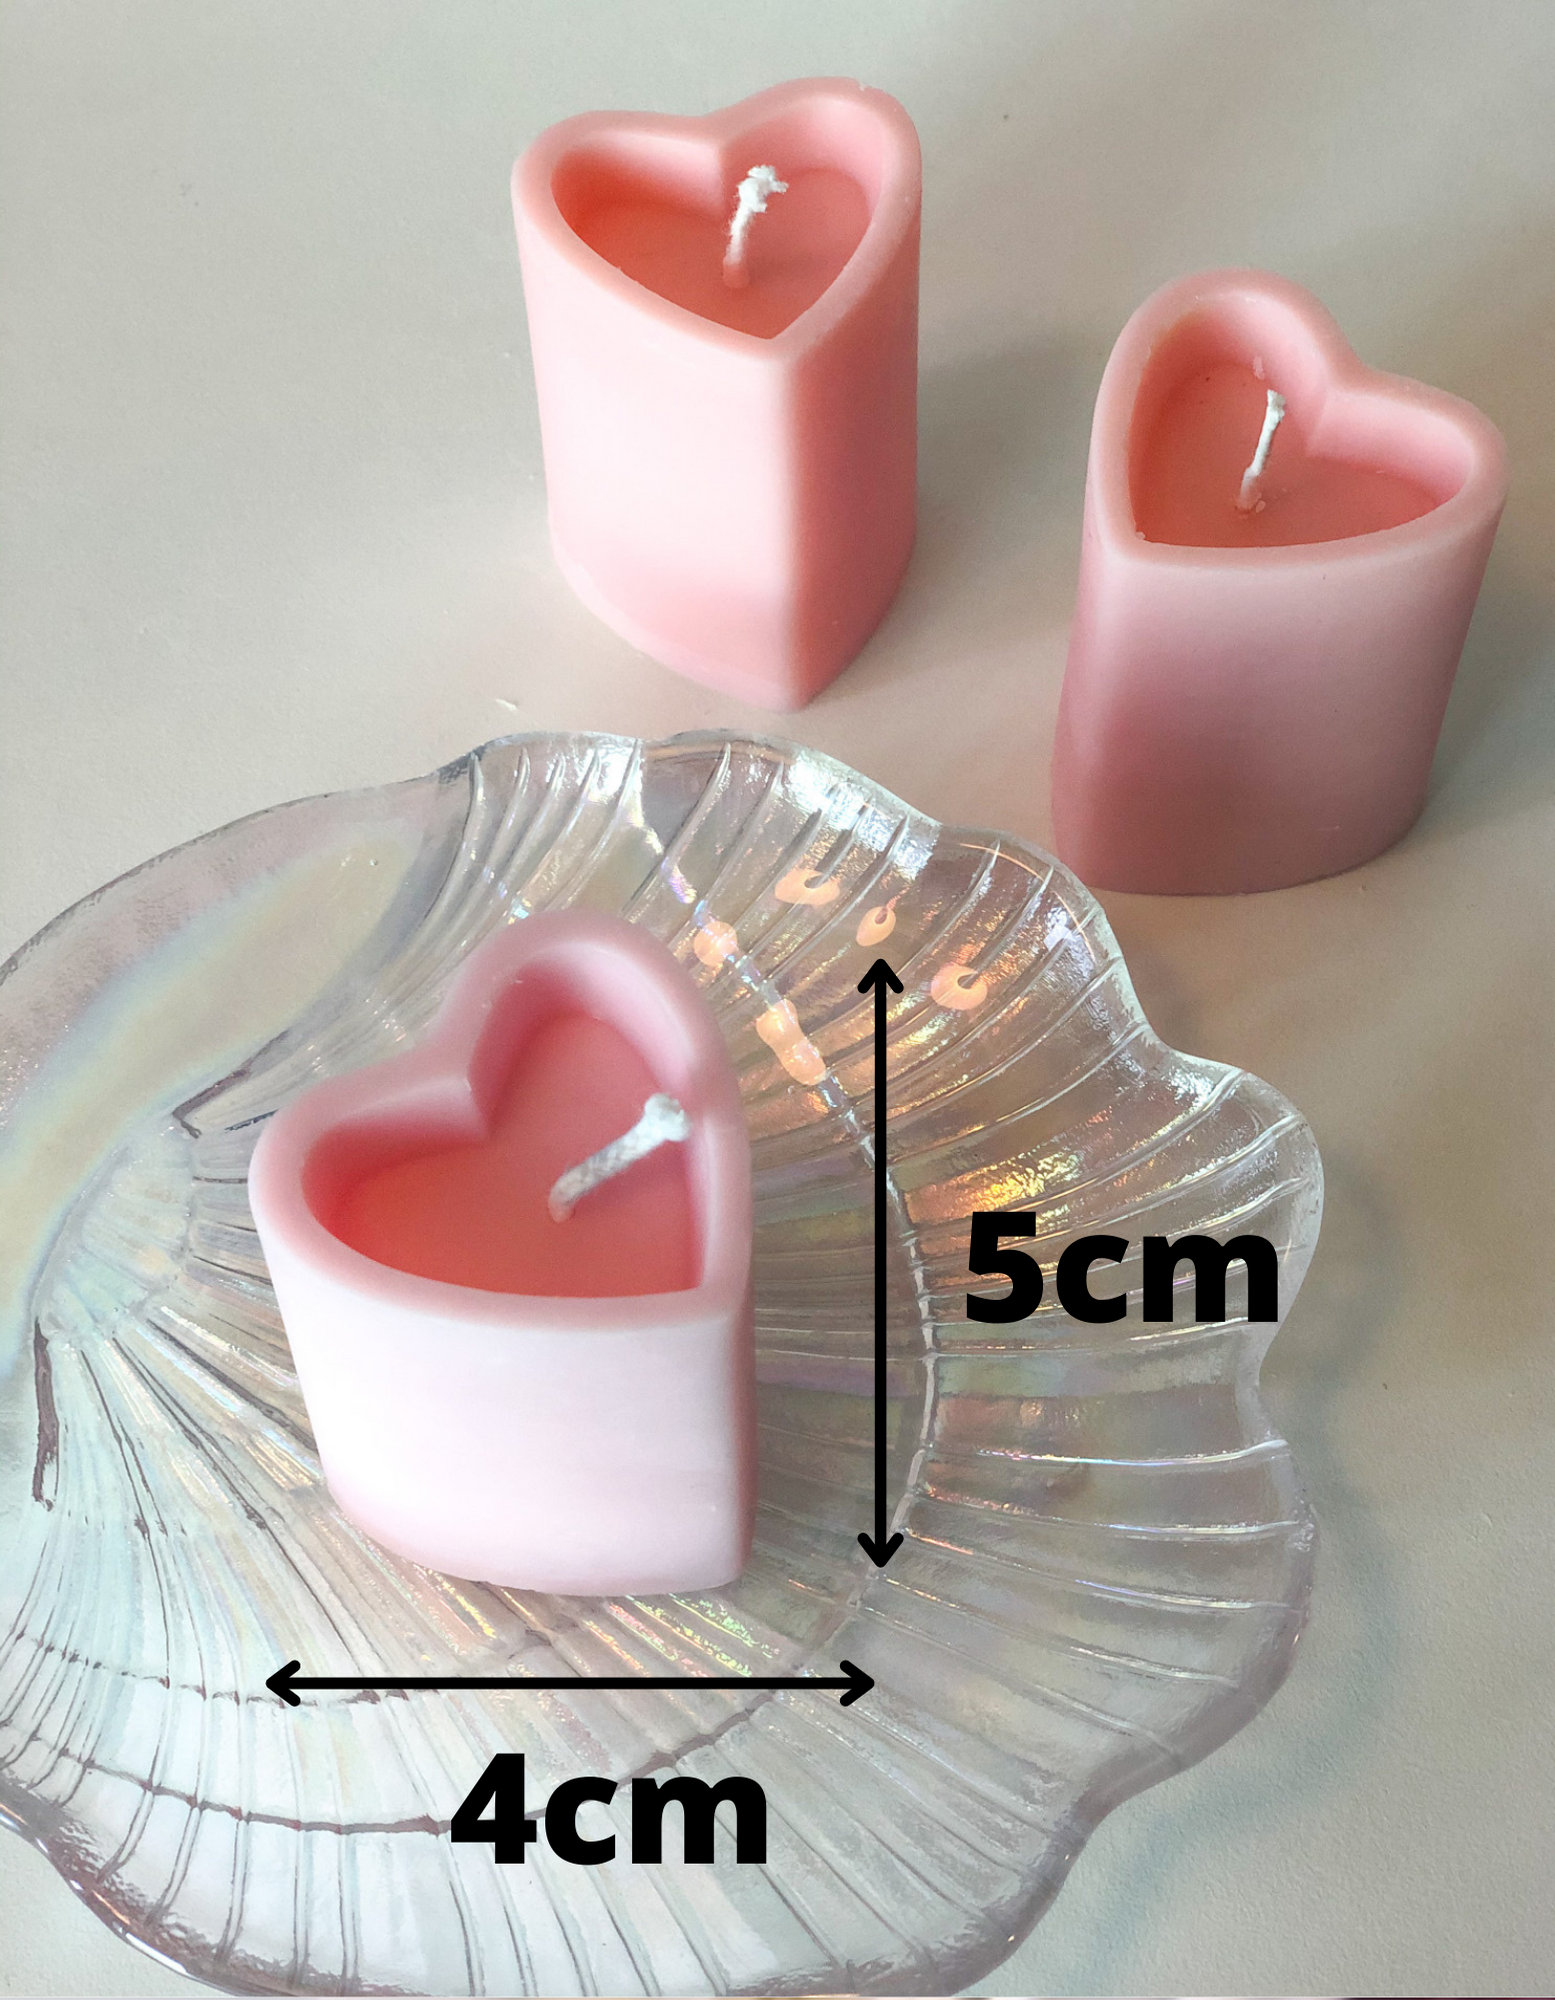 Heart Candle Pillar Candles Home Decor Cute Gifts Personalized Gifts Best  Friend Giftsheart Shaped Candlescented Pillar Candle 